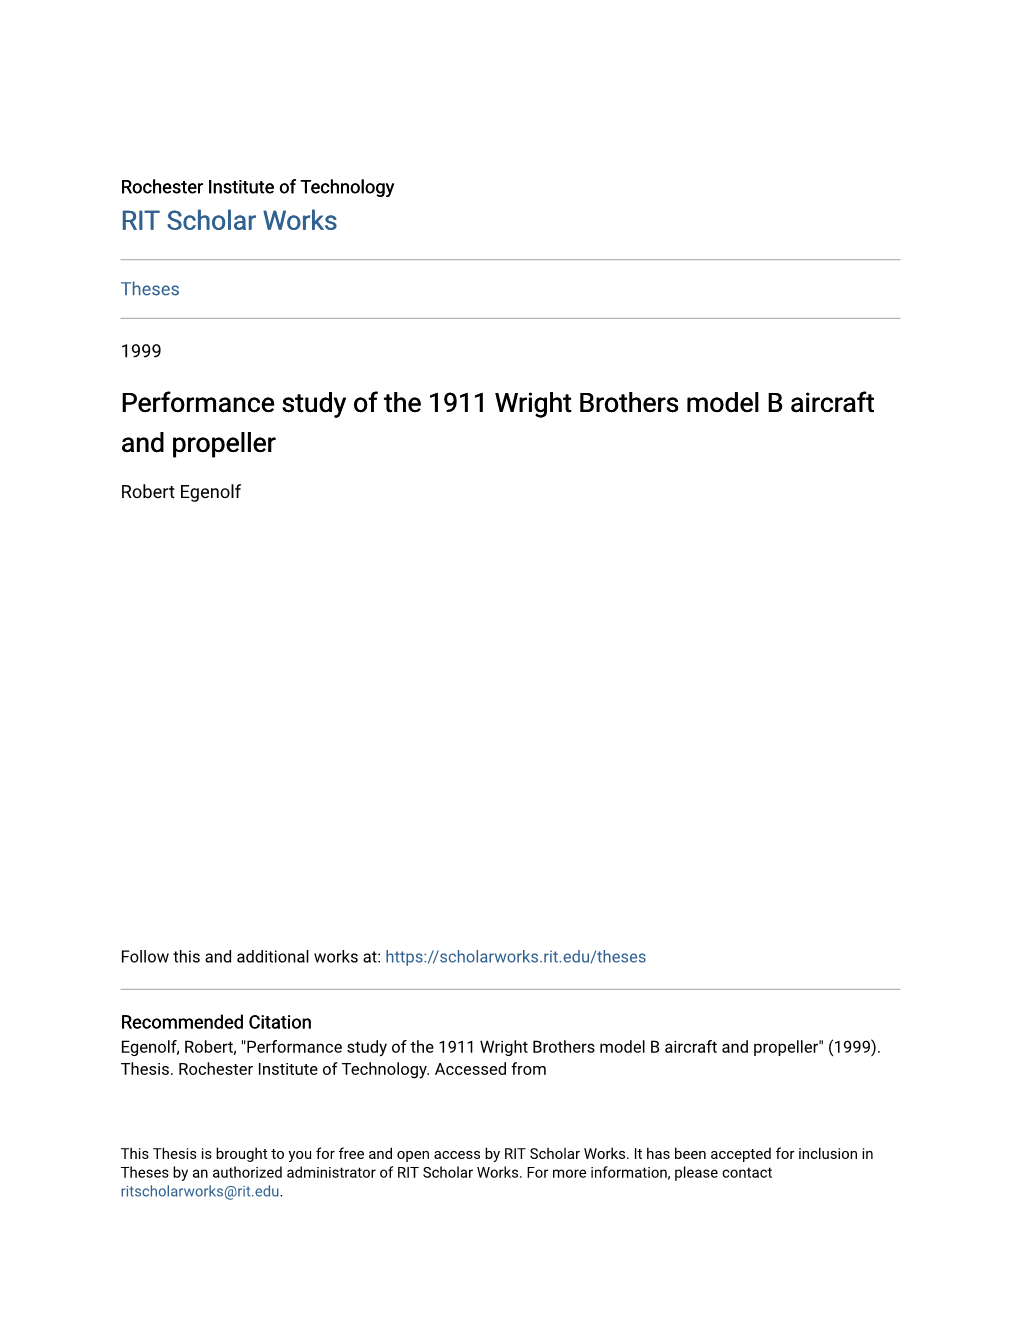 Performance Study of the 1911 Wright Brothers Model B Aircraft and Propeller